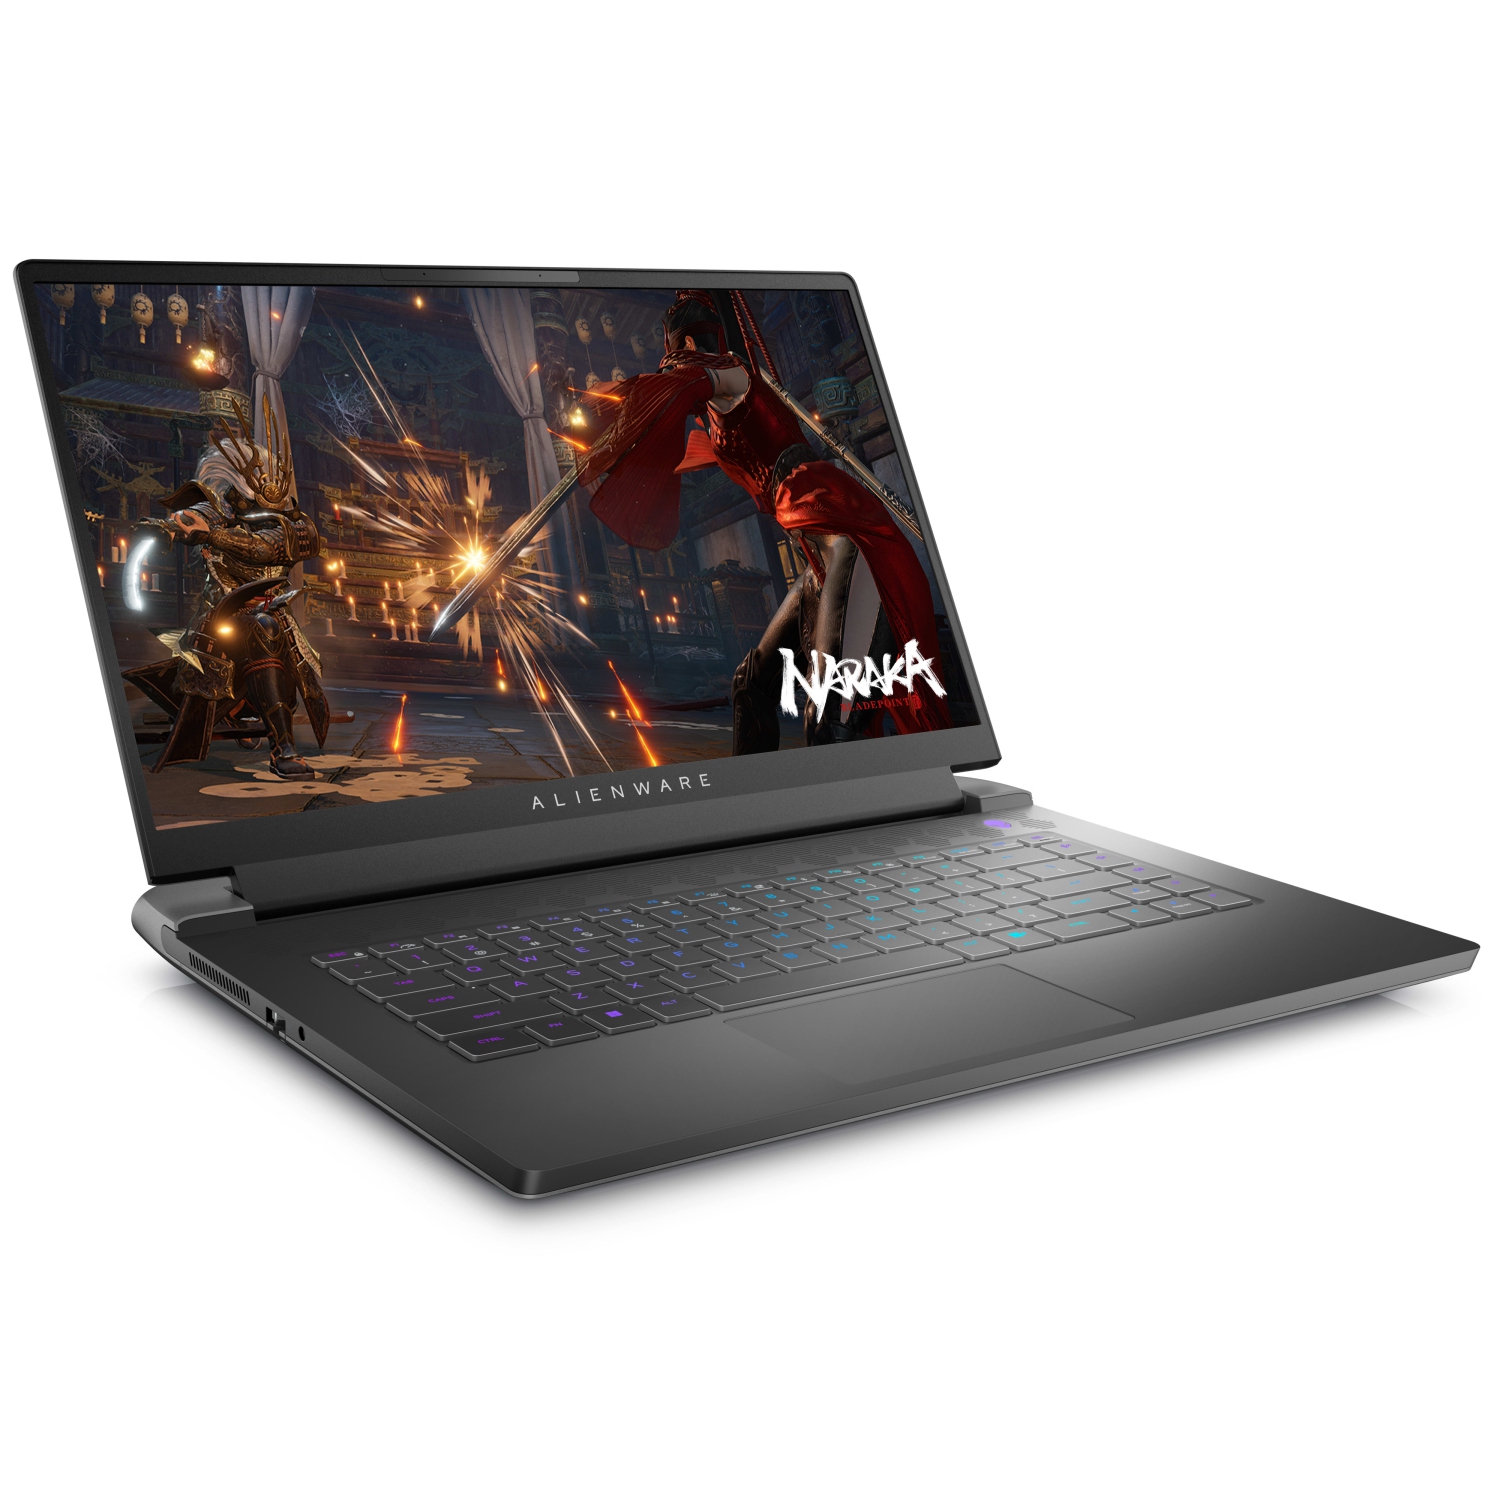 Refurbished (Excellent) – Dell Alienware m15 R7 Gaming Laptop (2022) | 15.6" FHD | Core i9 - 2TB SSD - 64GB RAM - 3070 Ti | 14 Cores @ 5 GHz - 12th Gen CPU - 8GB GDDR6X